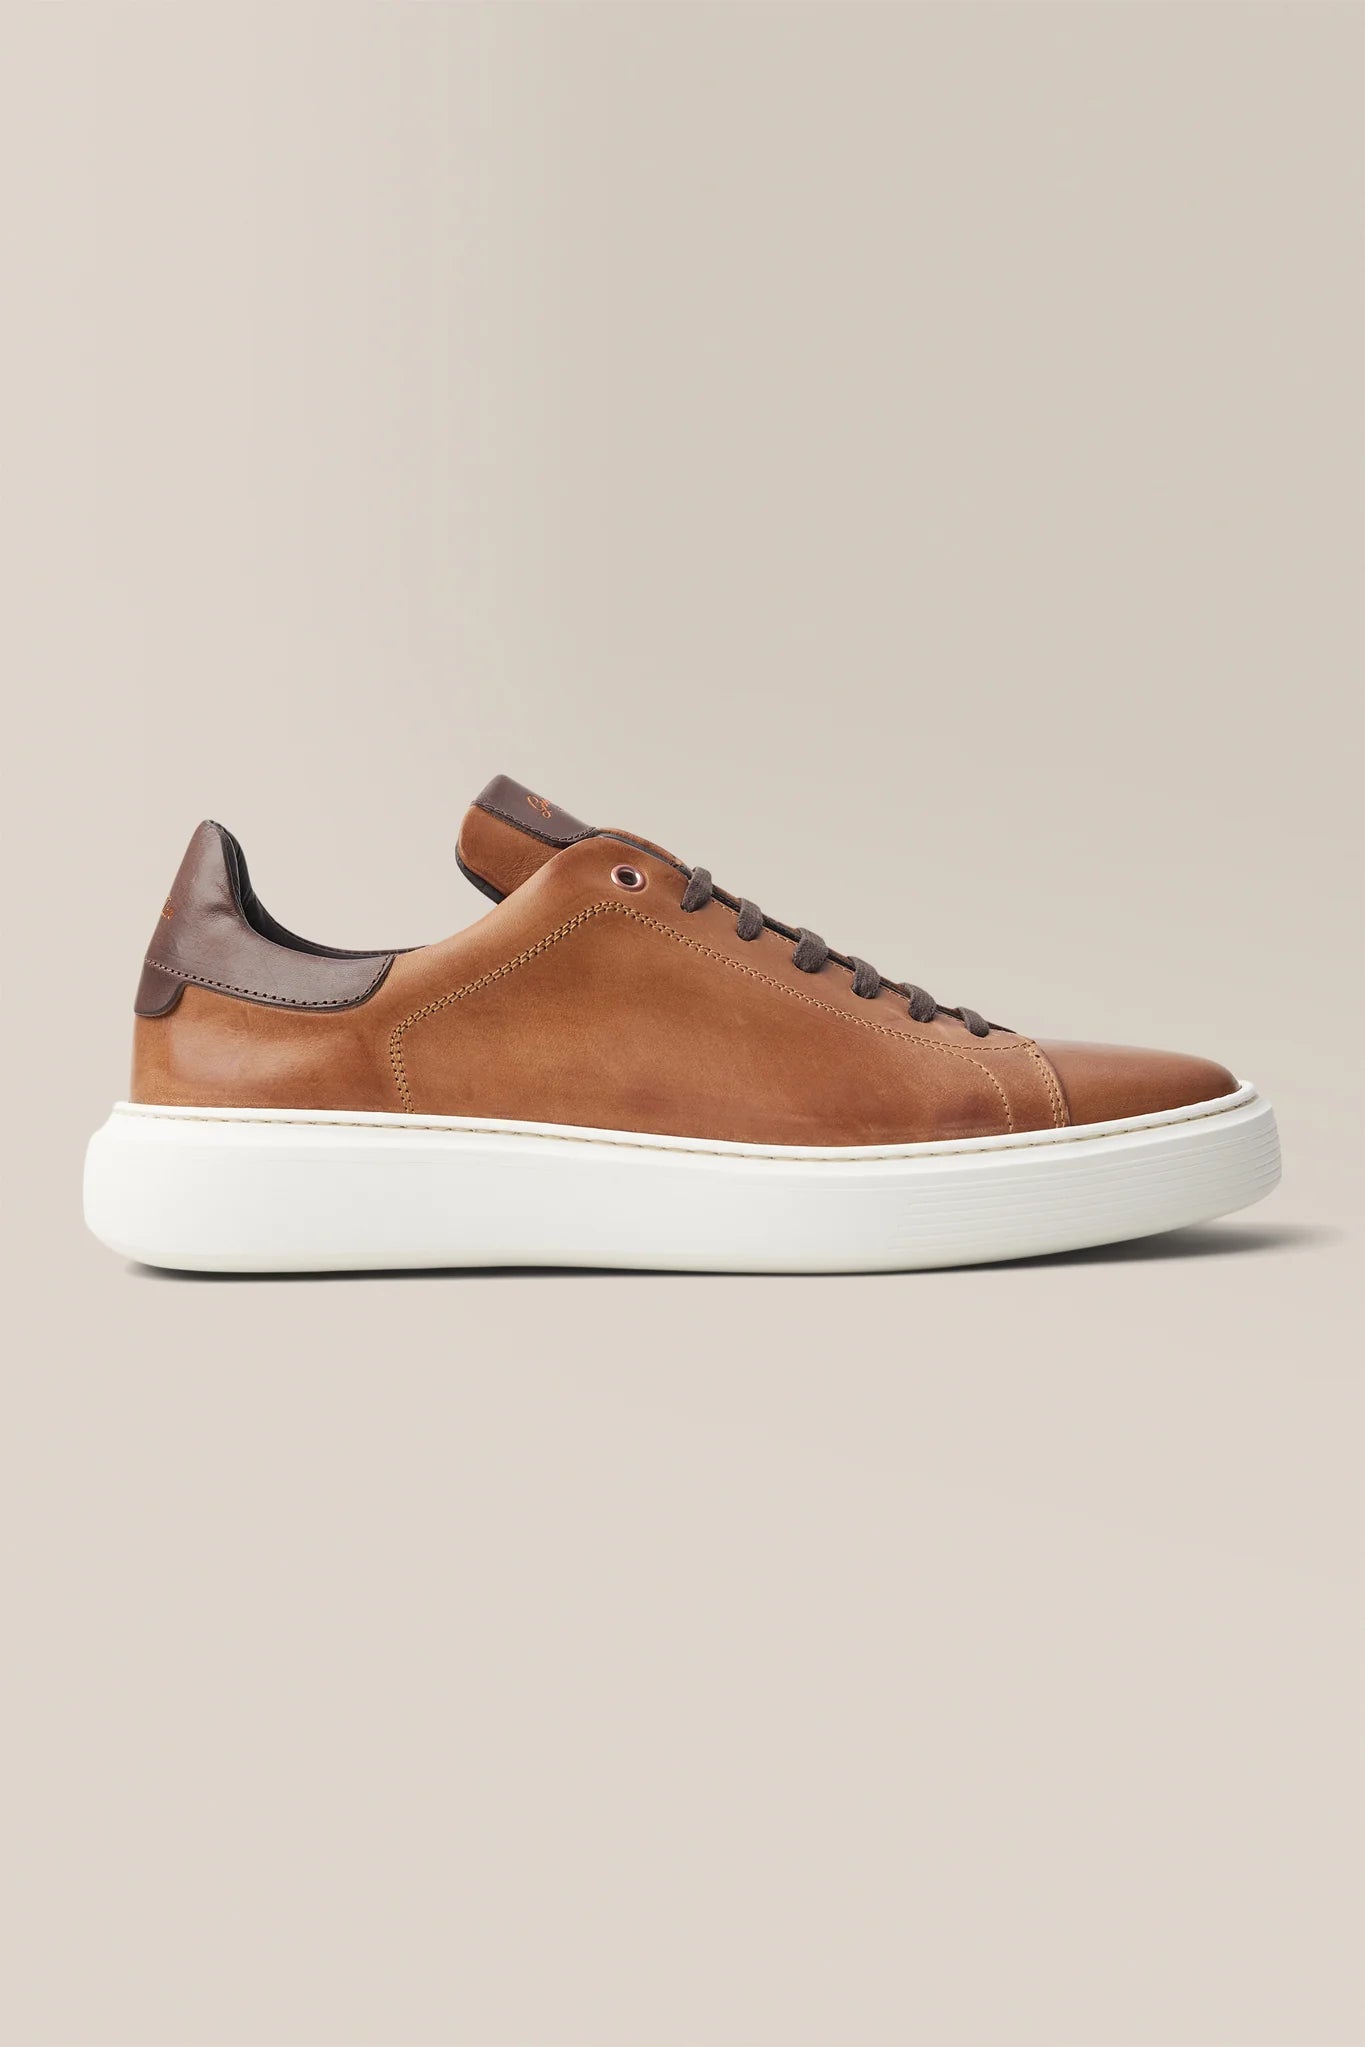 The timeless sneaker gets a very good upgrade. Featuring a prominent, high-contrast spoiler and bolder outsole, this wear-with-anything style lives up to its name and then some. 